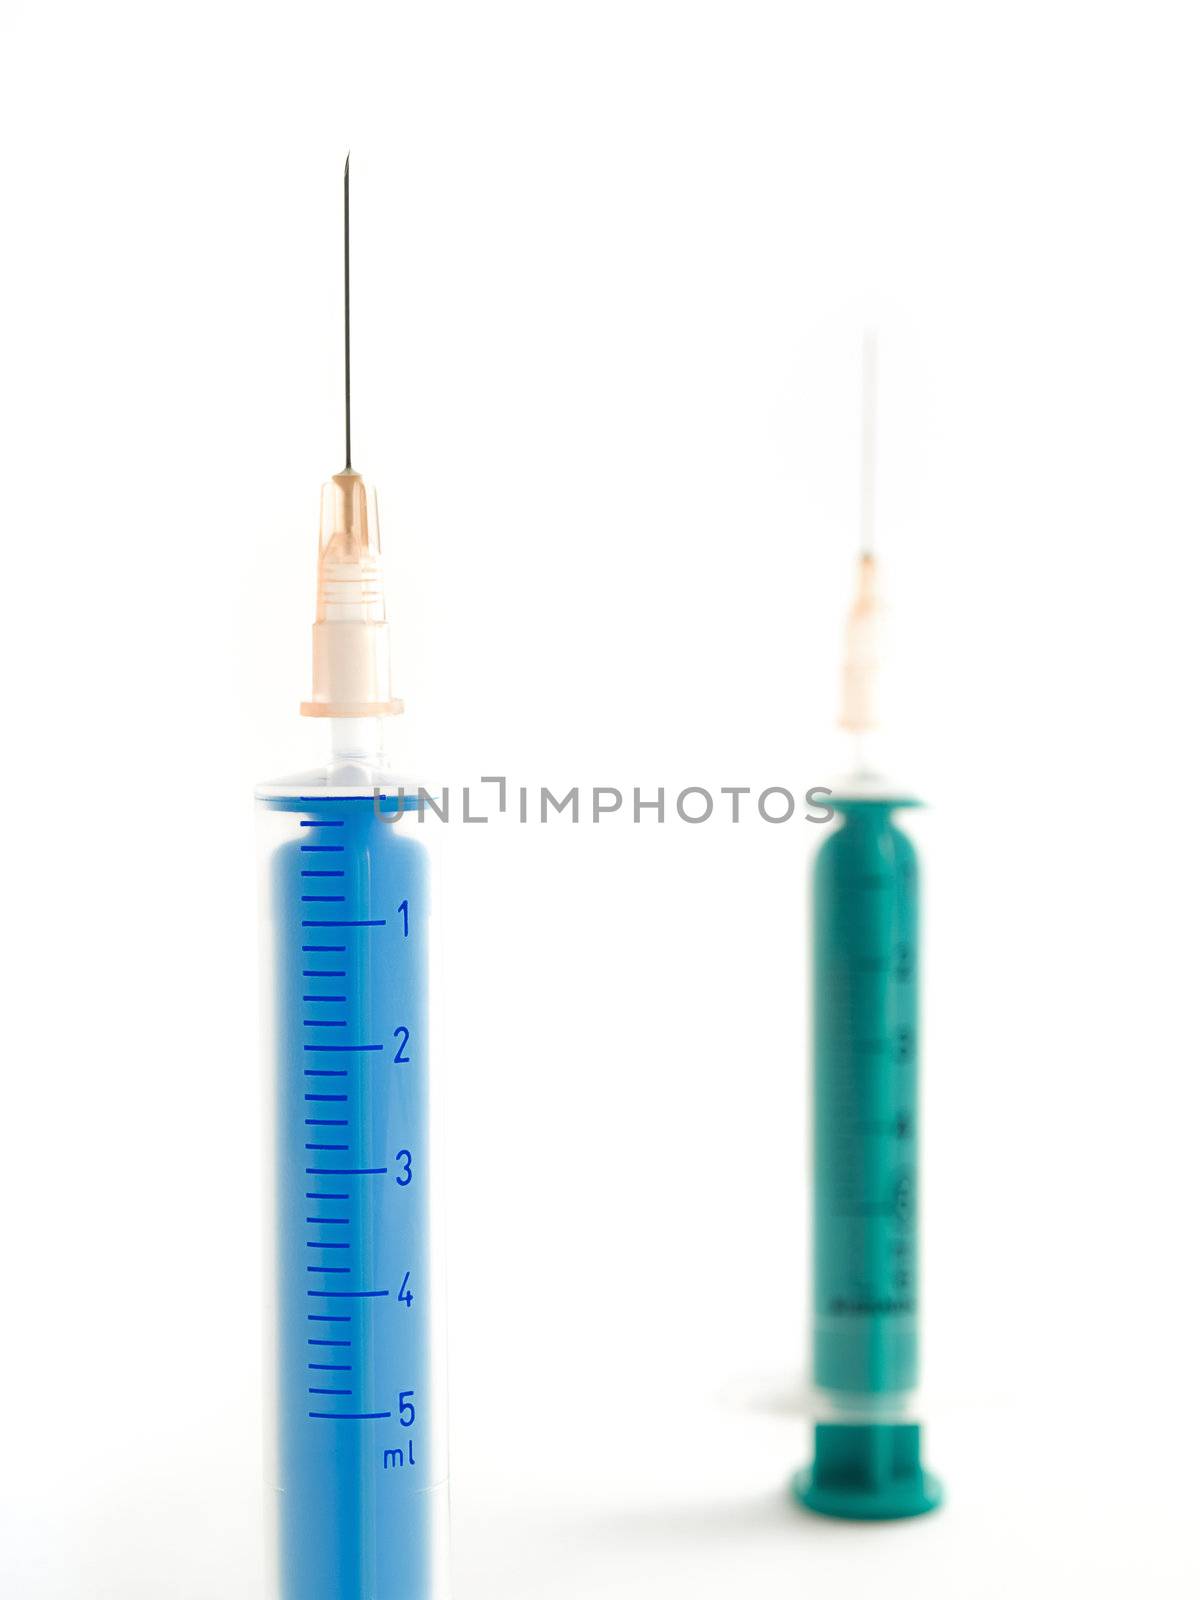 two syringes against clear white background taken from up close